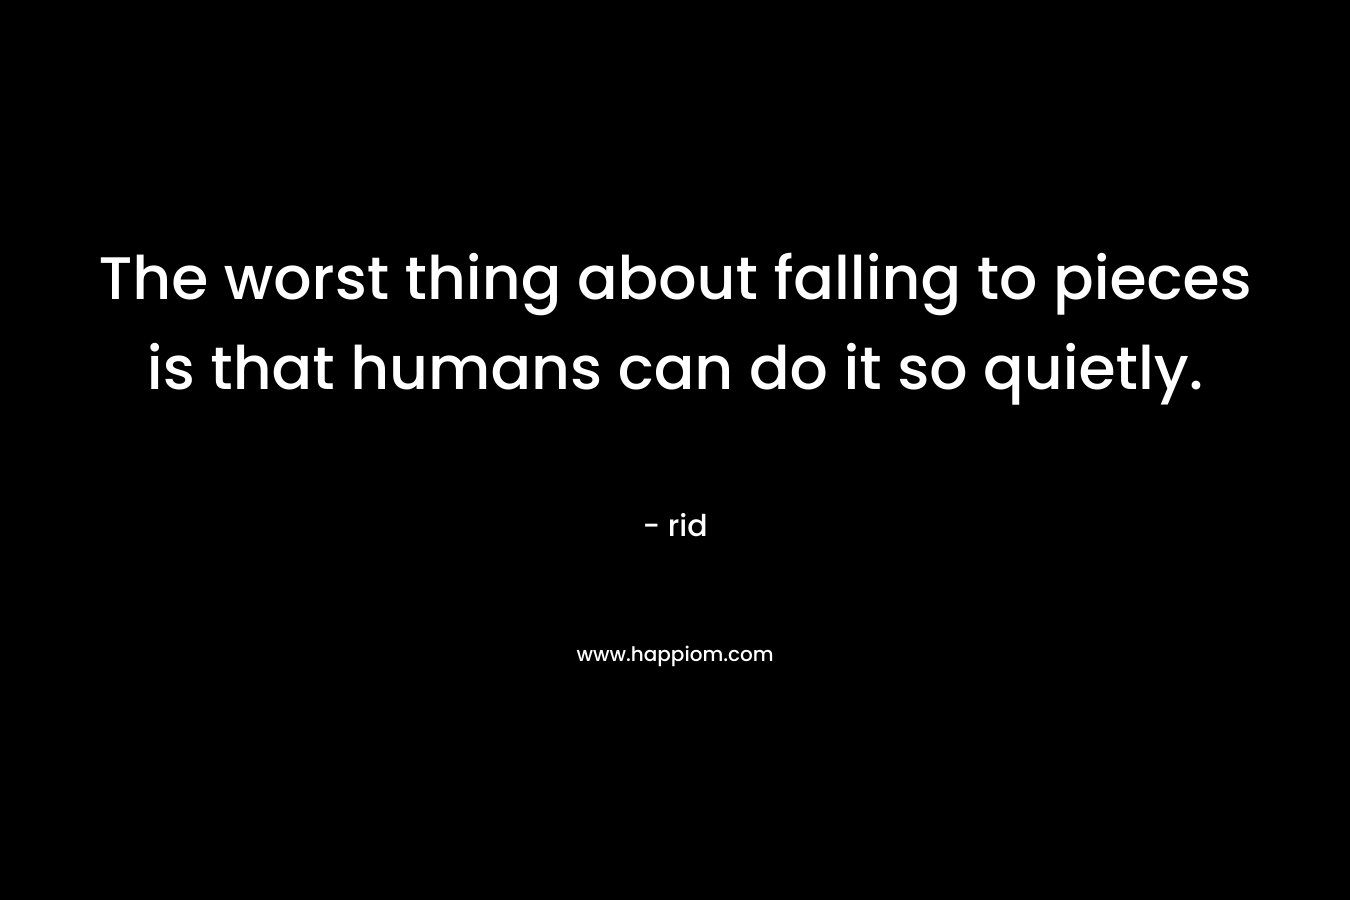 The worst thing about falling to pieces is that humans can do it so quietly.